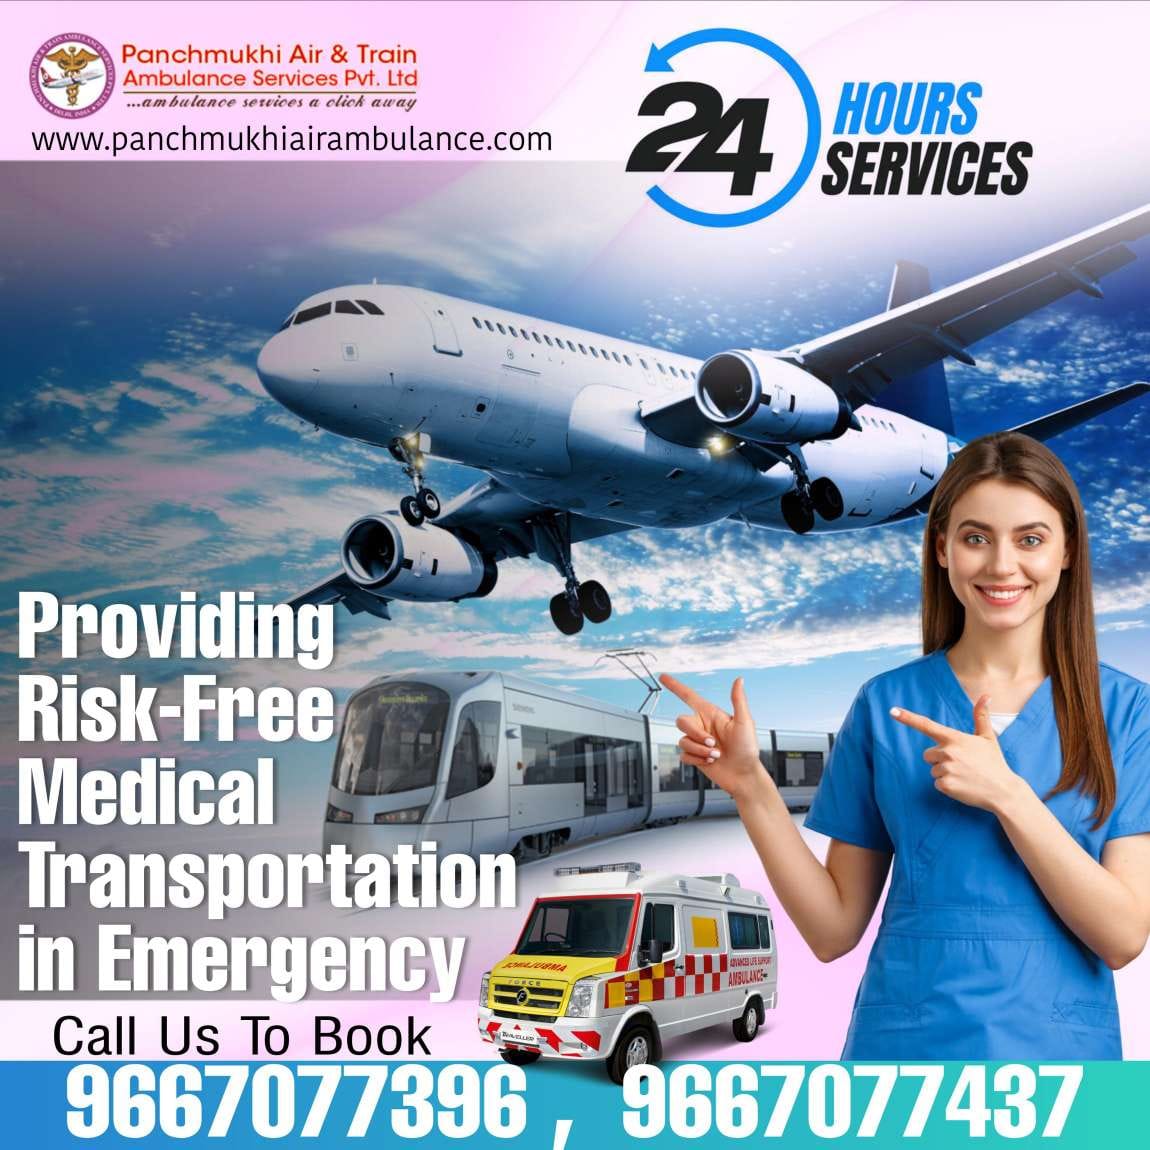 Panchmukhi Air Ambulance is Associated with The Safety and Comfort of the Patients